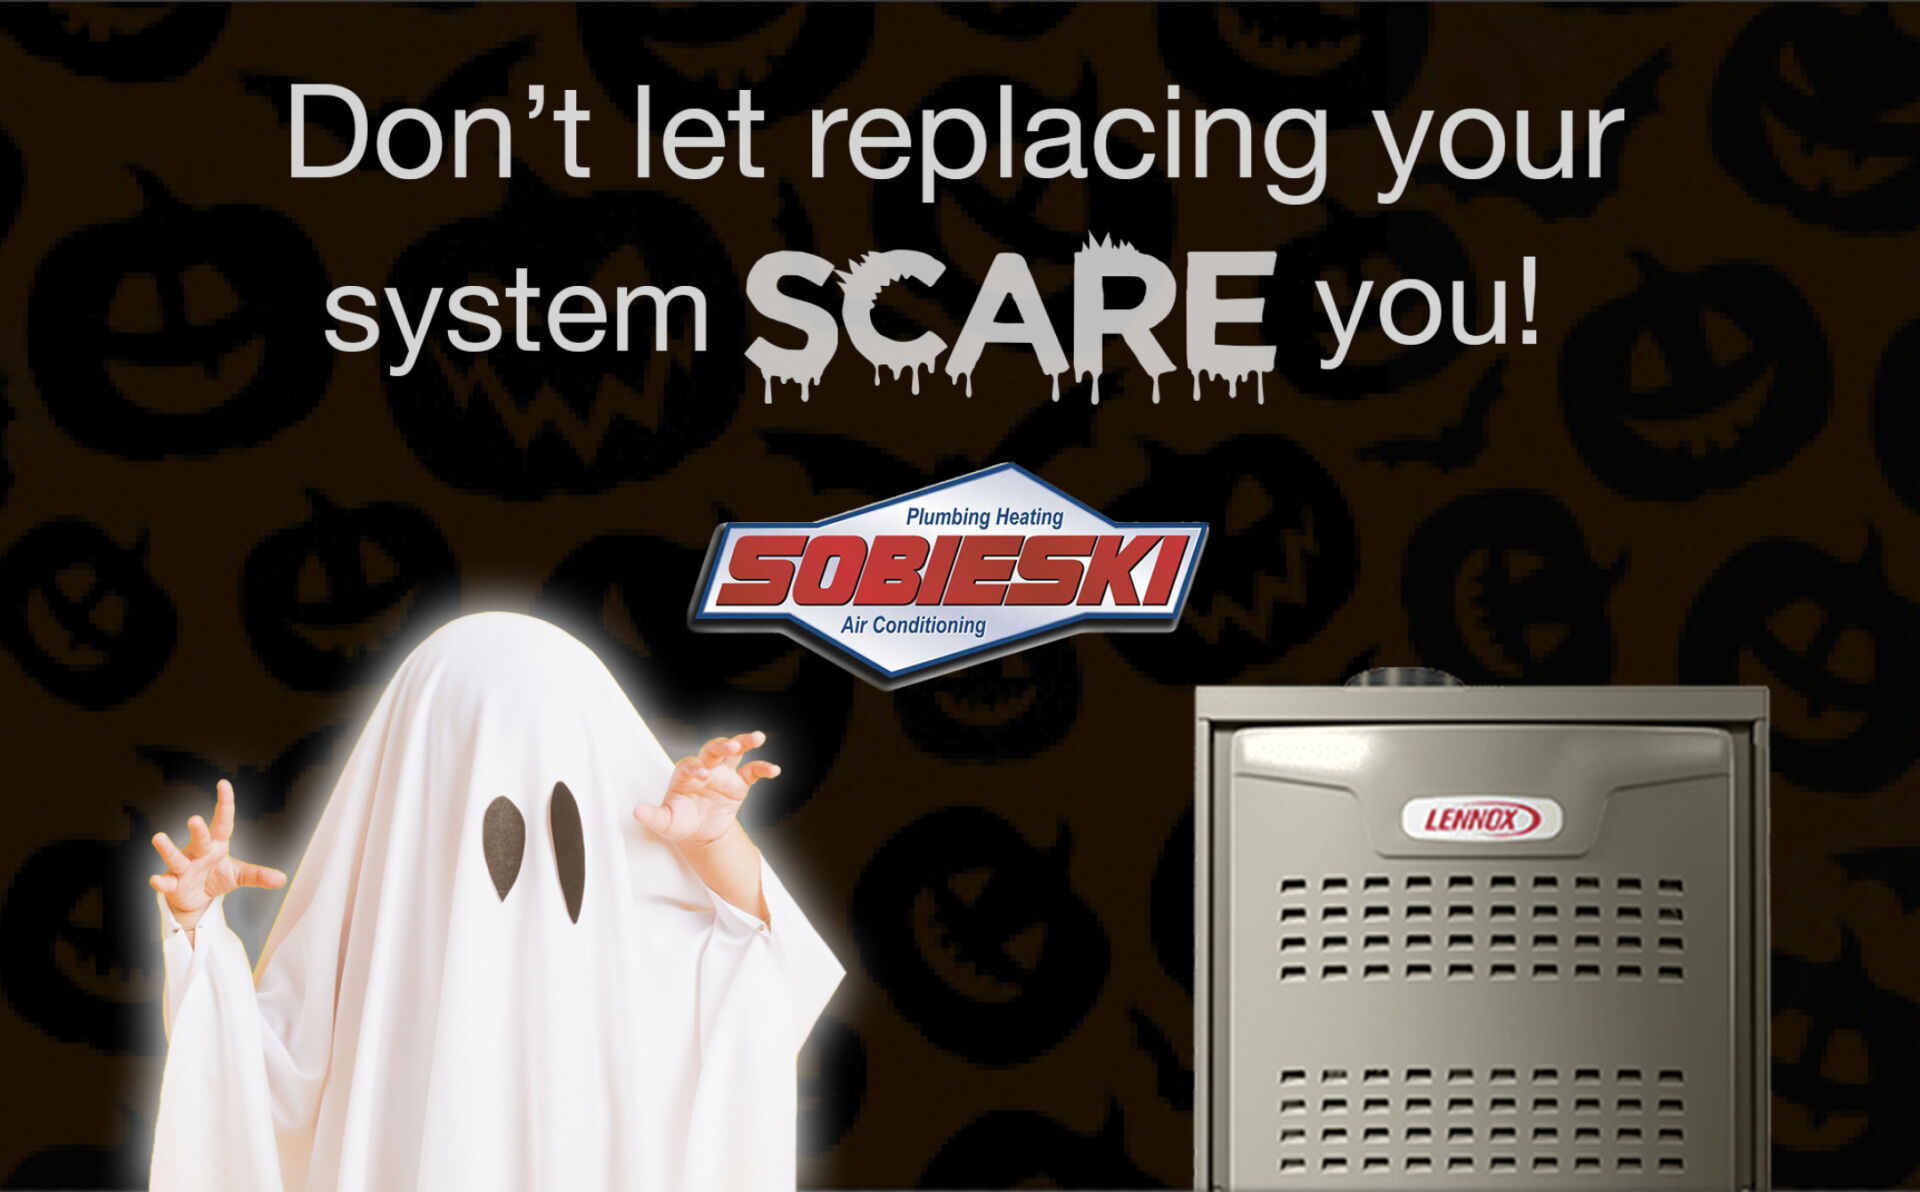 Don't let replacing your system scare you!